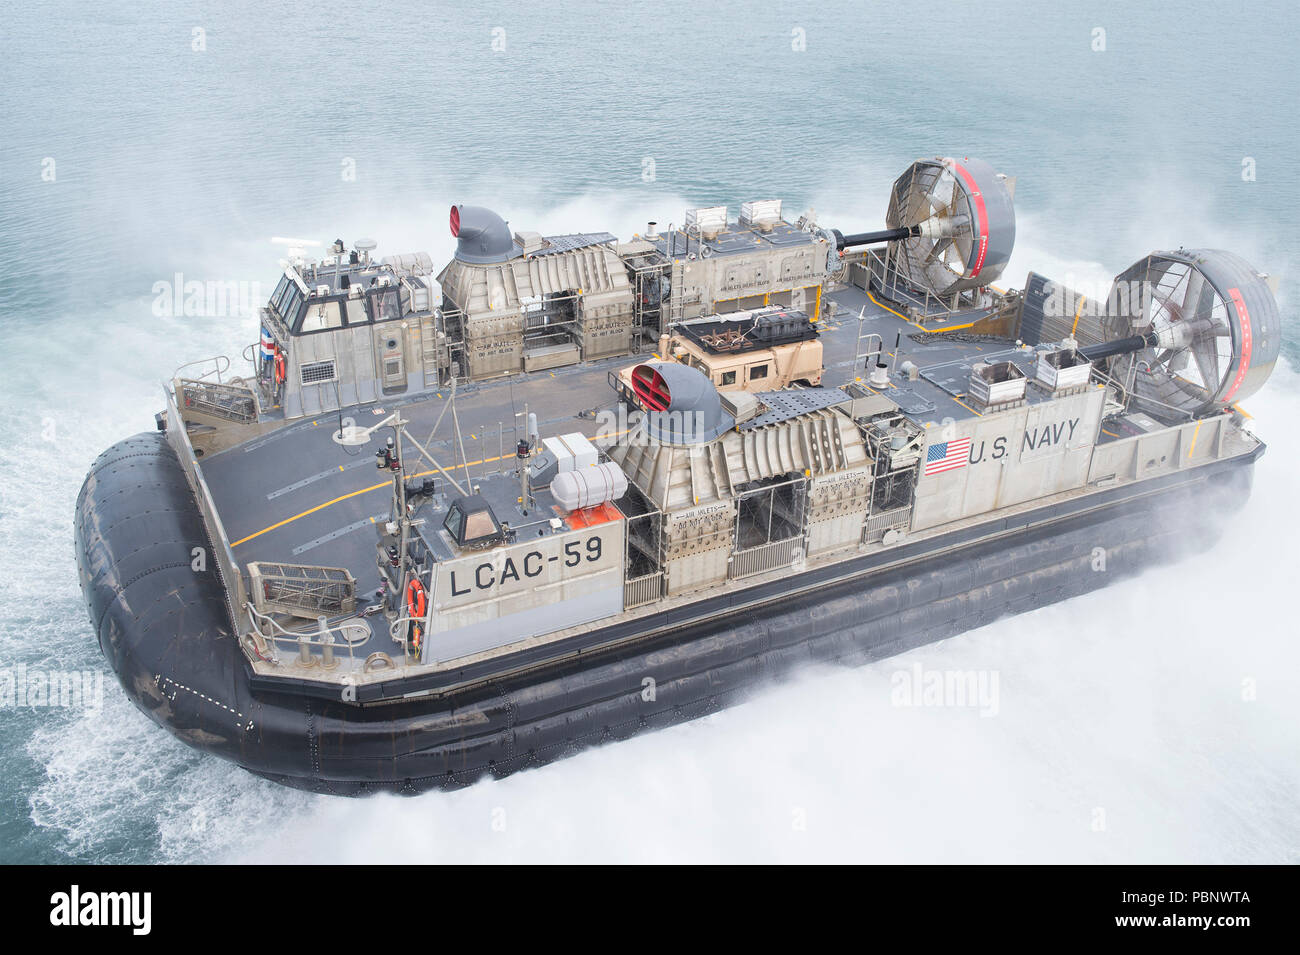 180726-N-RD713-1029 PEARL HARBOR, Hawaii (July 26, 2018) Landing craft air cushion (LCAC) 59, assigned to Assault Craft Unit (ACU) 5, departs the well deck of the amphibious assault ship USS Bonhomme Richard (LHD 6). Bonhomme Richard is currently underway in the U.S. 3rd Fleet area of operations. (U.S. Navy photo by Mass Communication Specialist 3rd Class Zachary DiPadova) Stock Photo